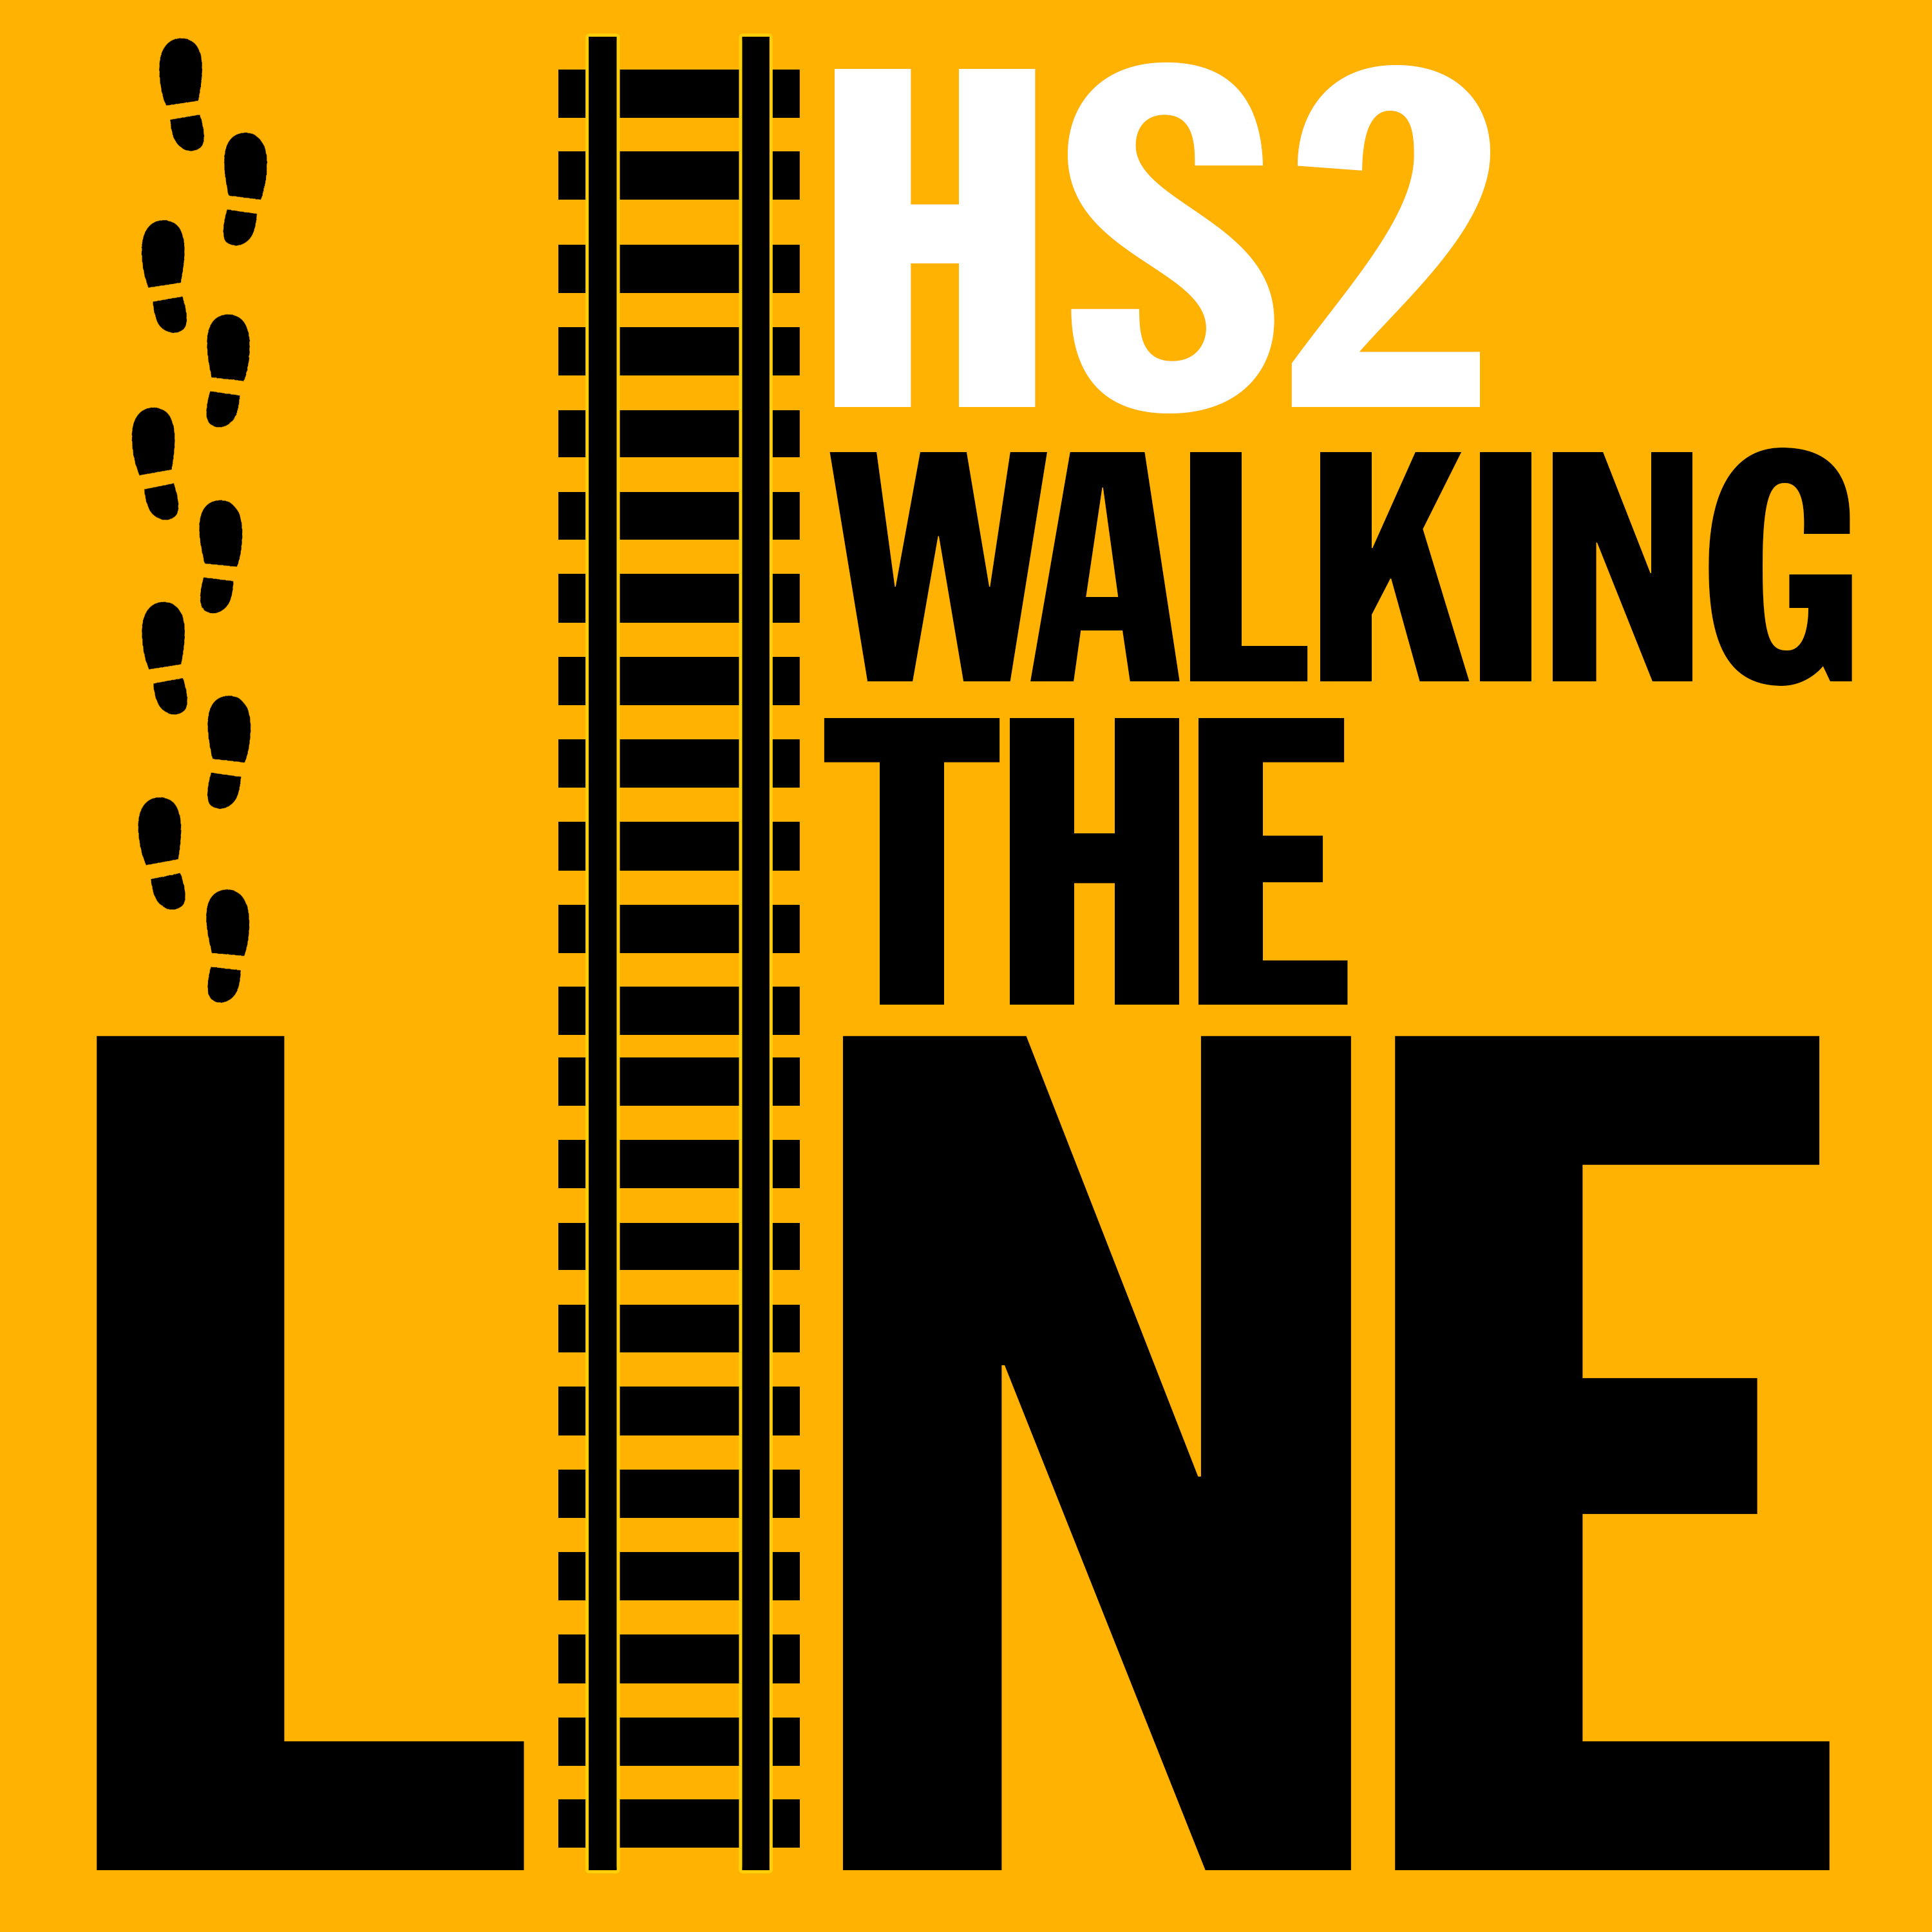 The Families Evicted by HS2